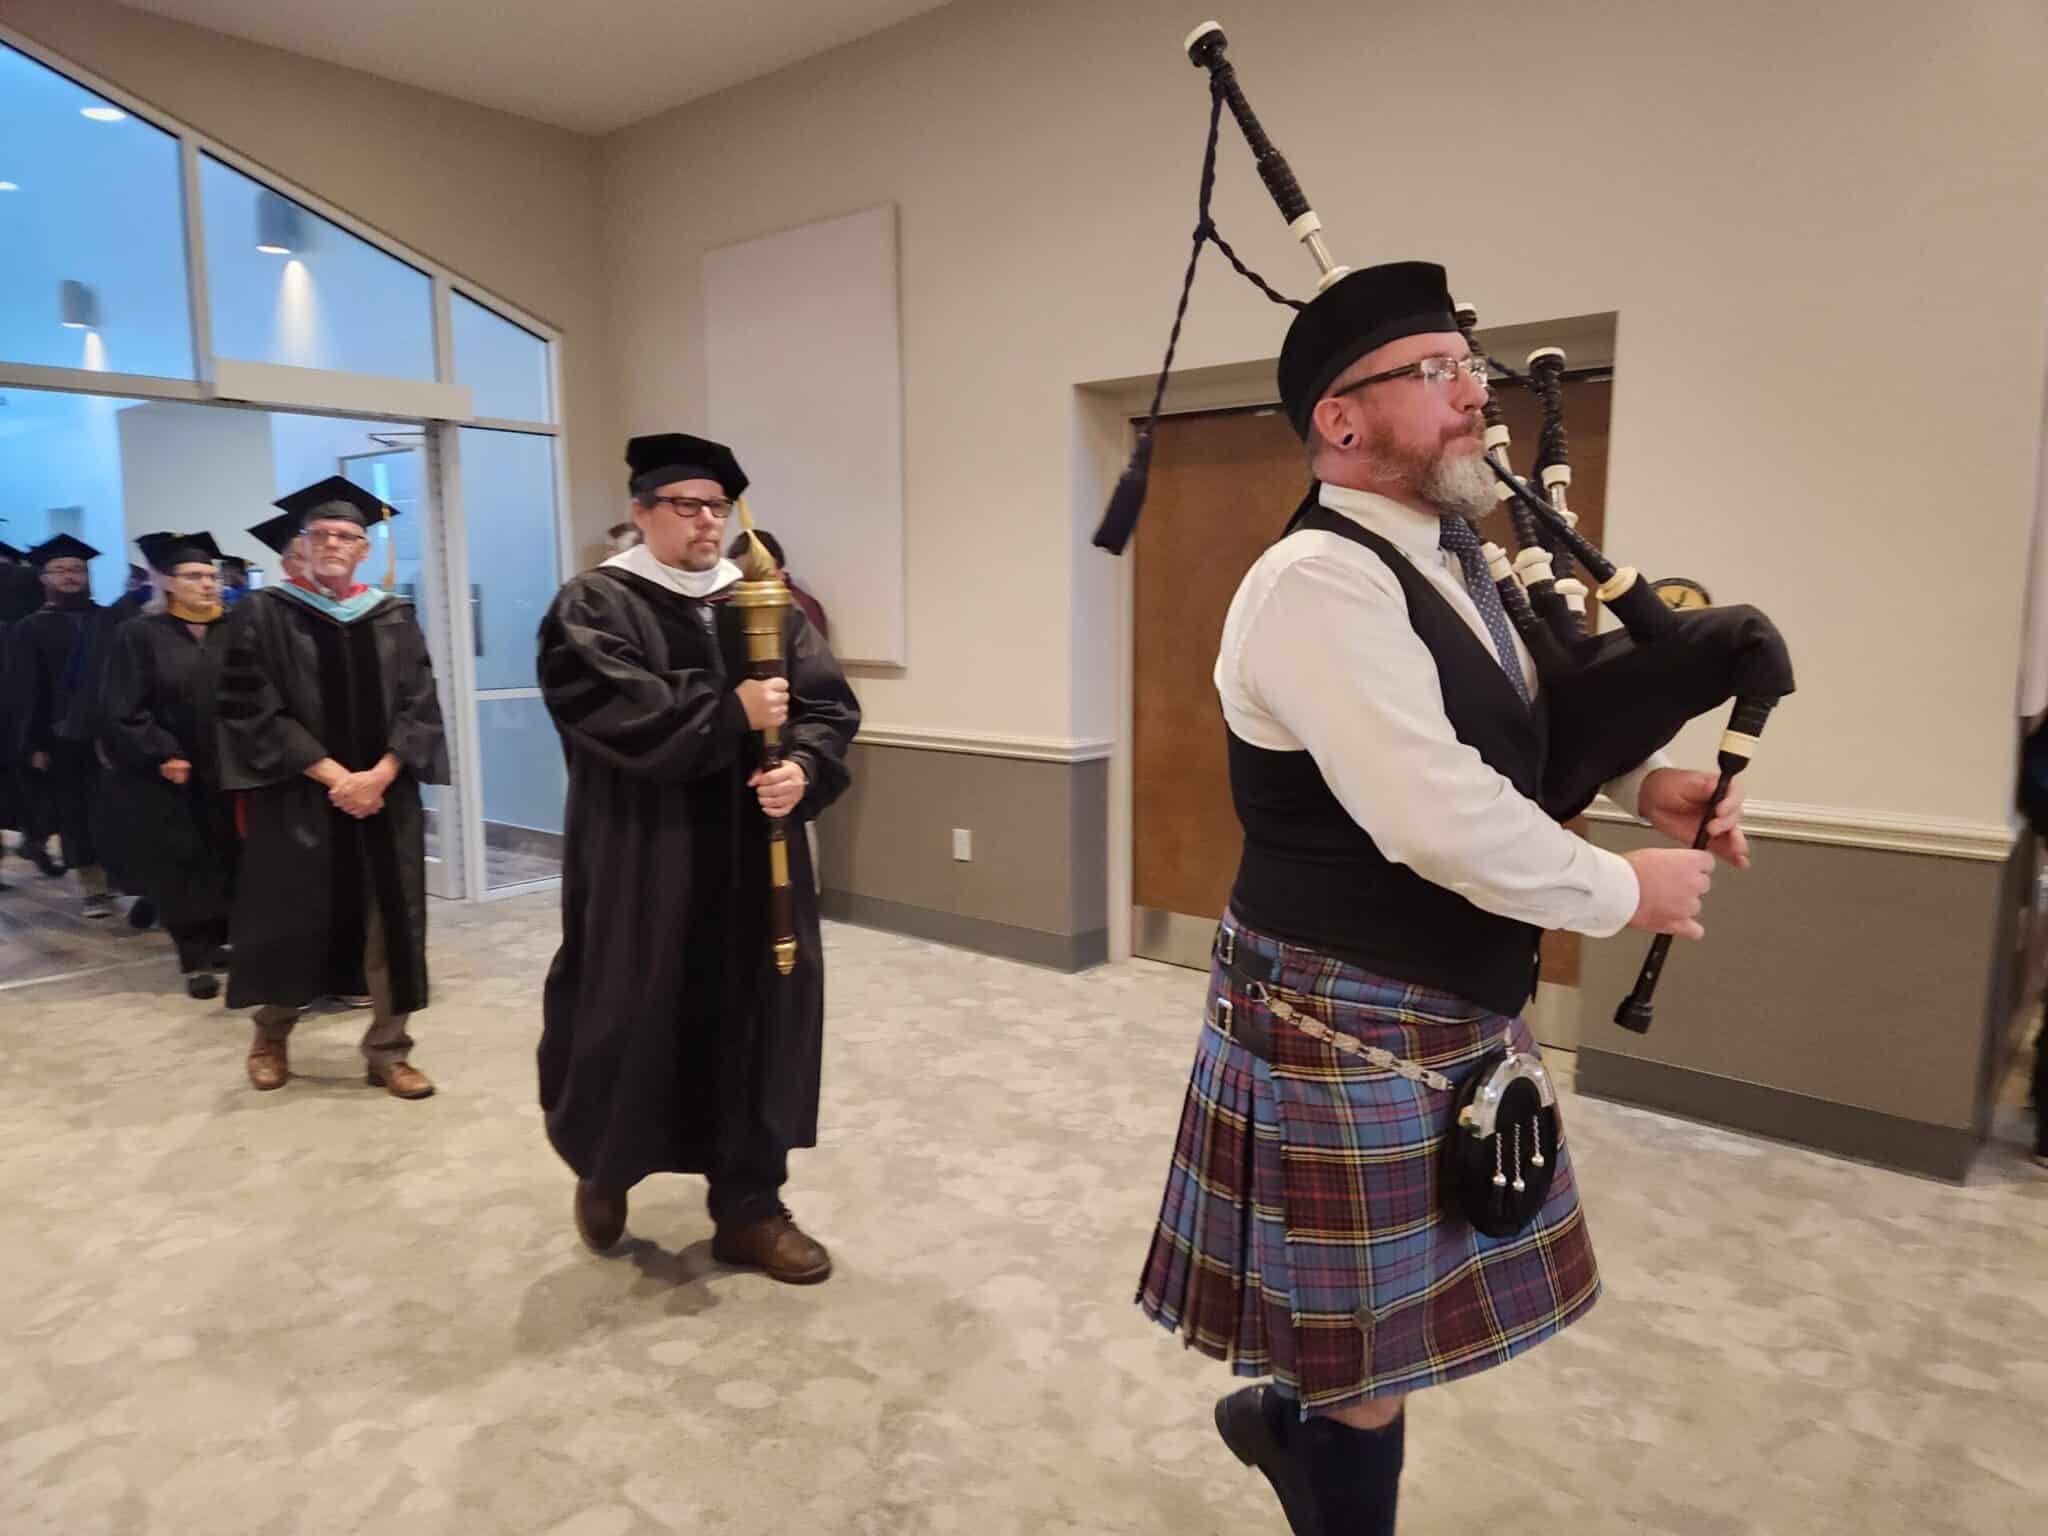 Beacon College Convocation entrance with bagpiper 2023.